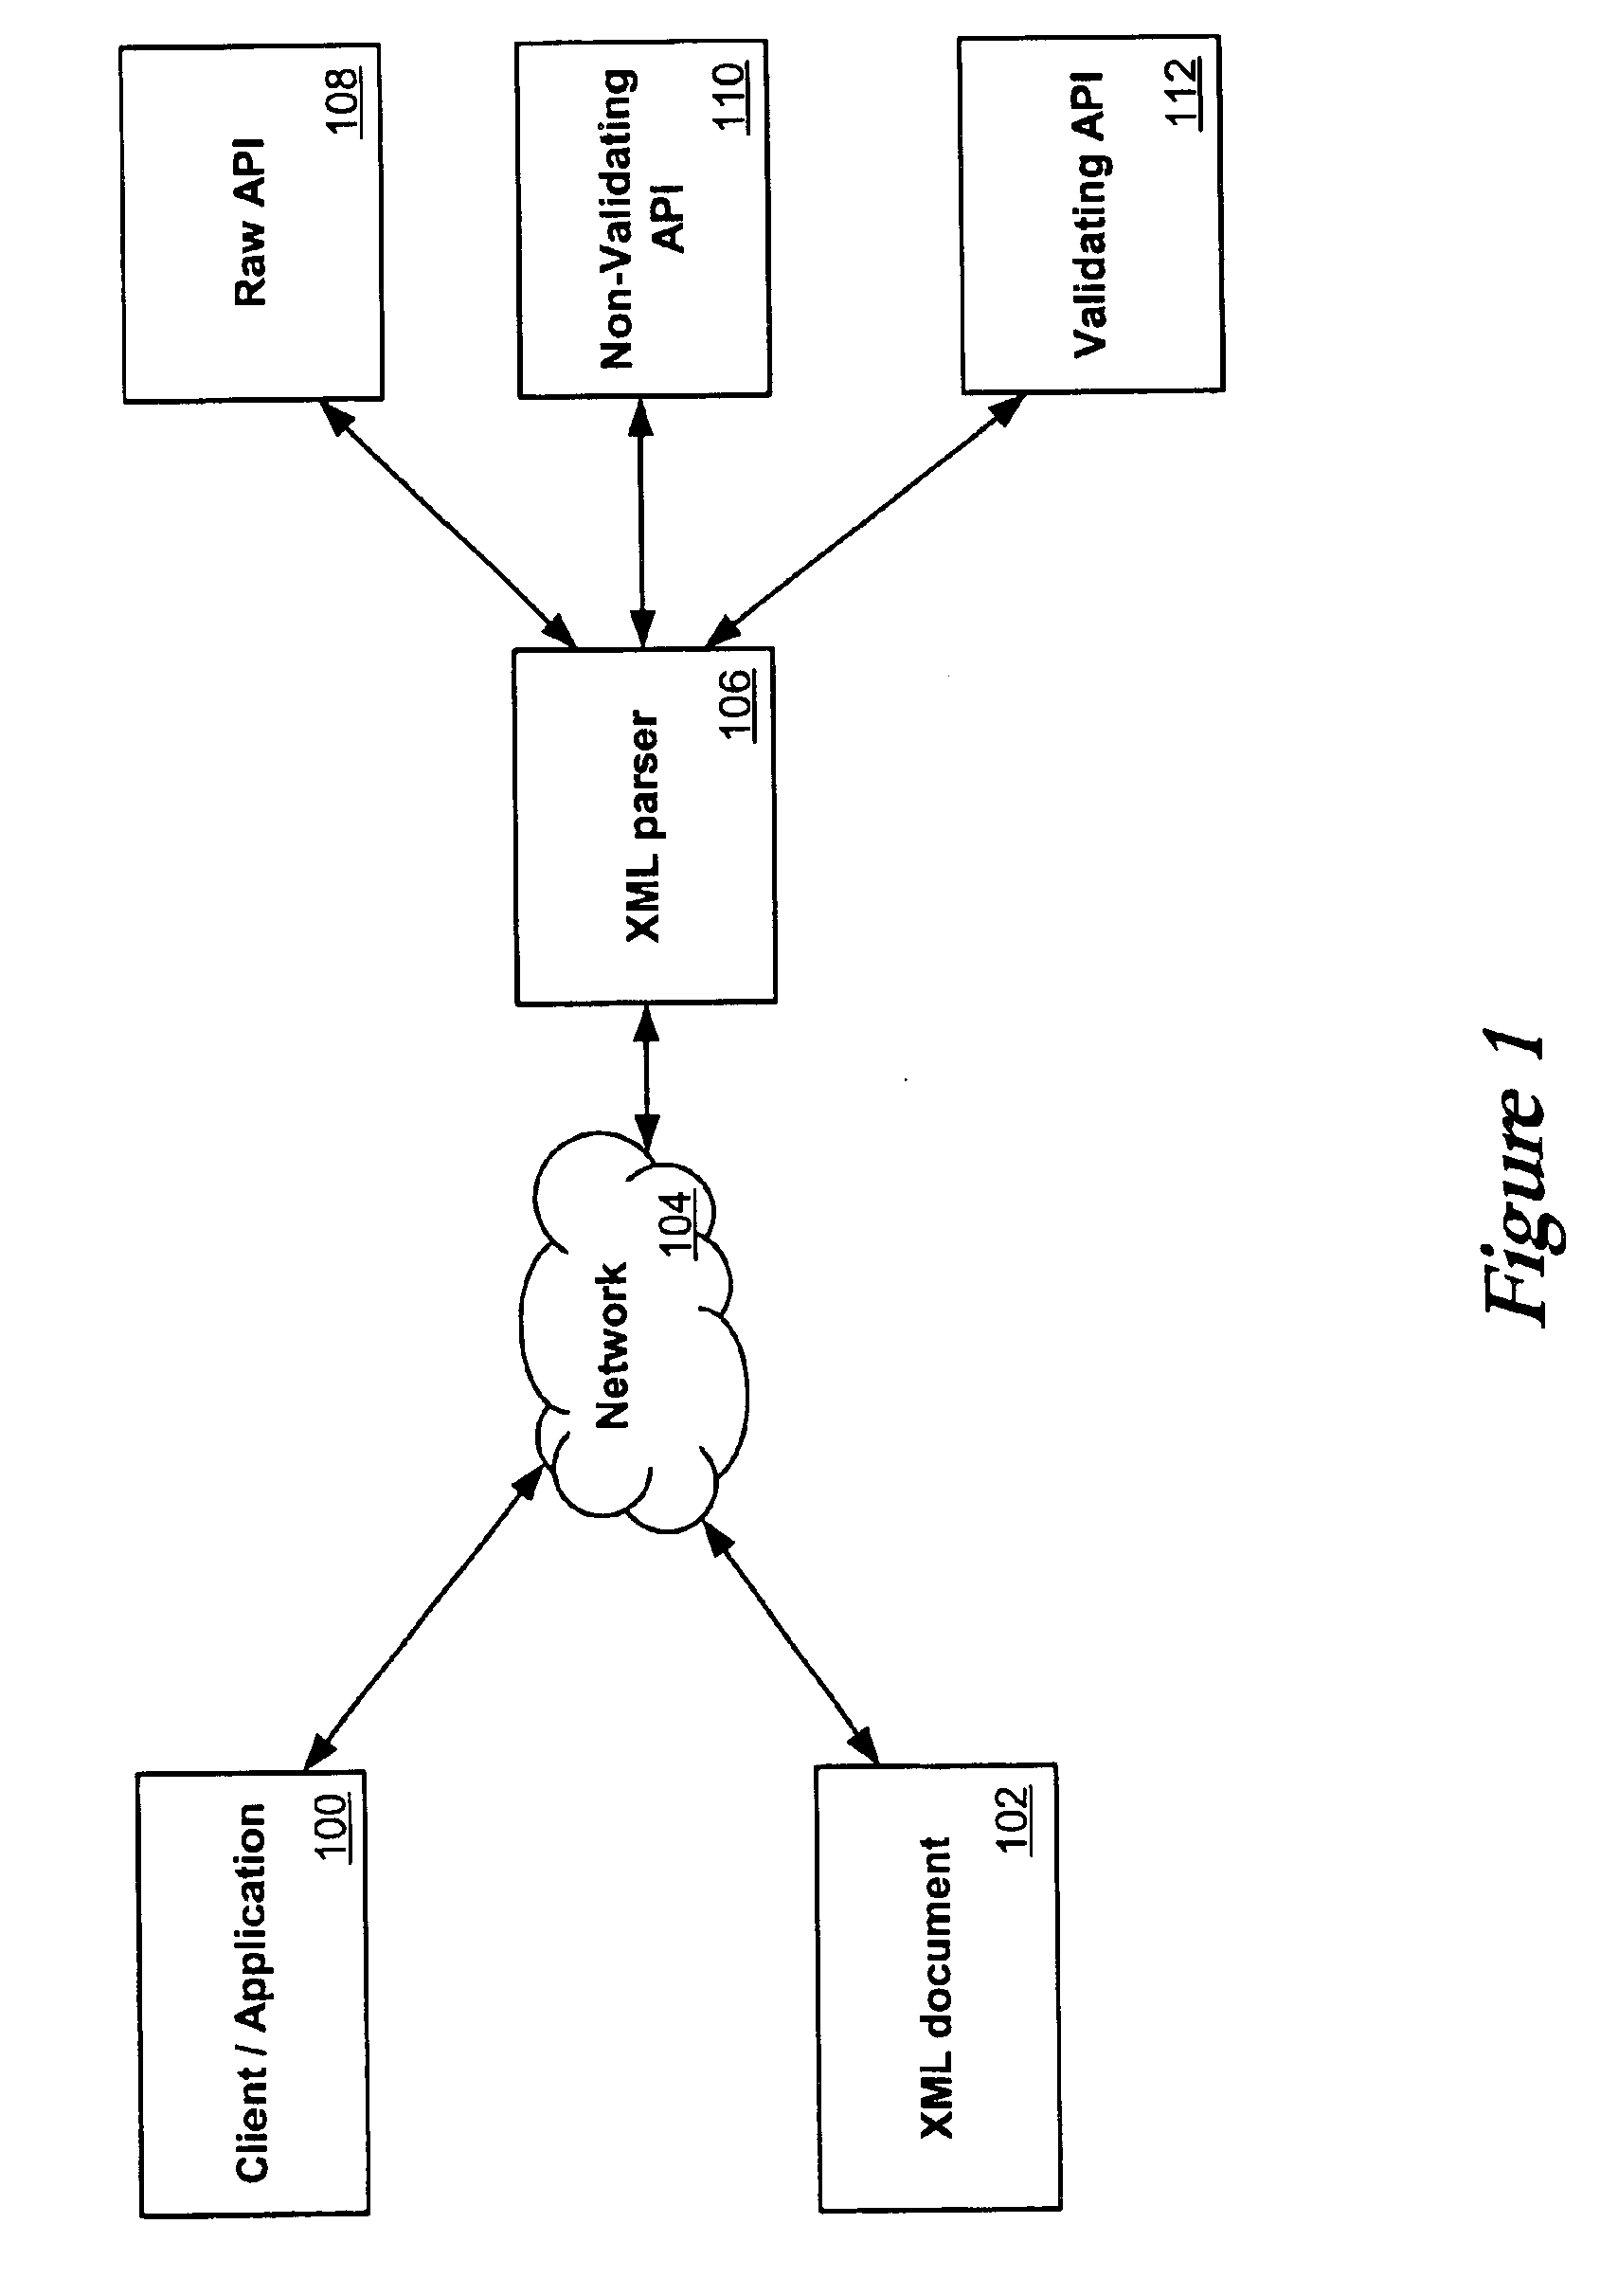 System and method for XML parsing